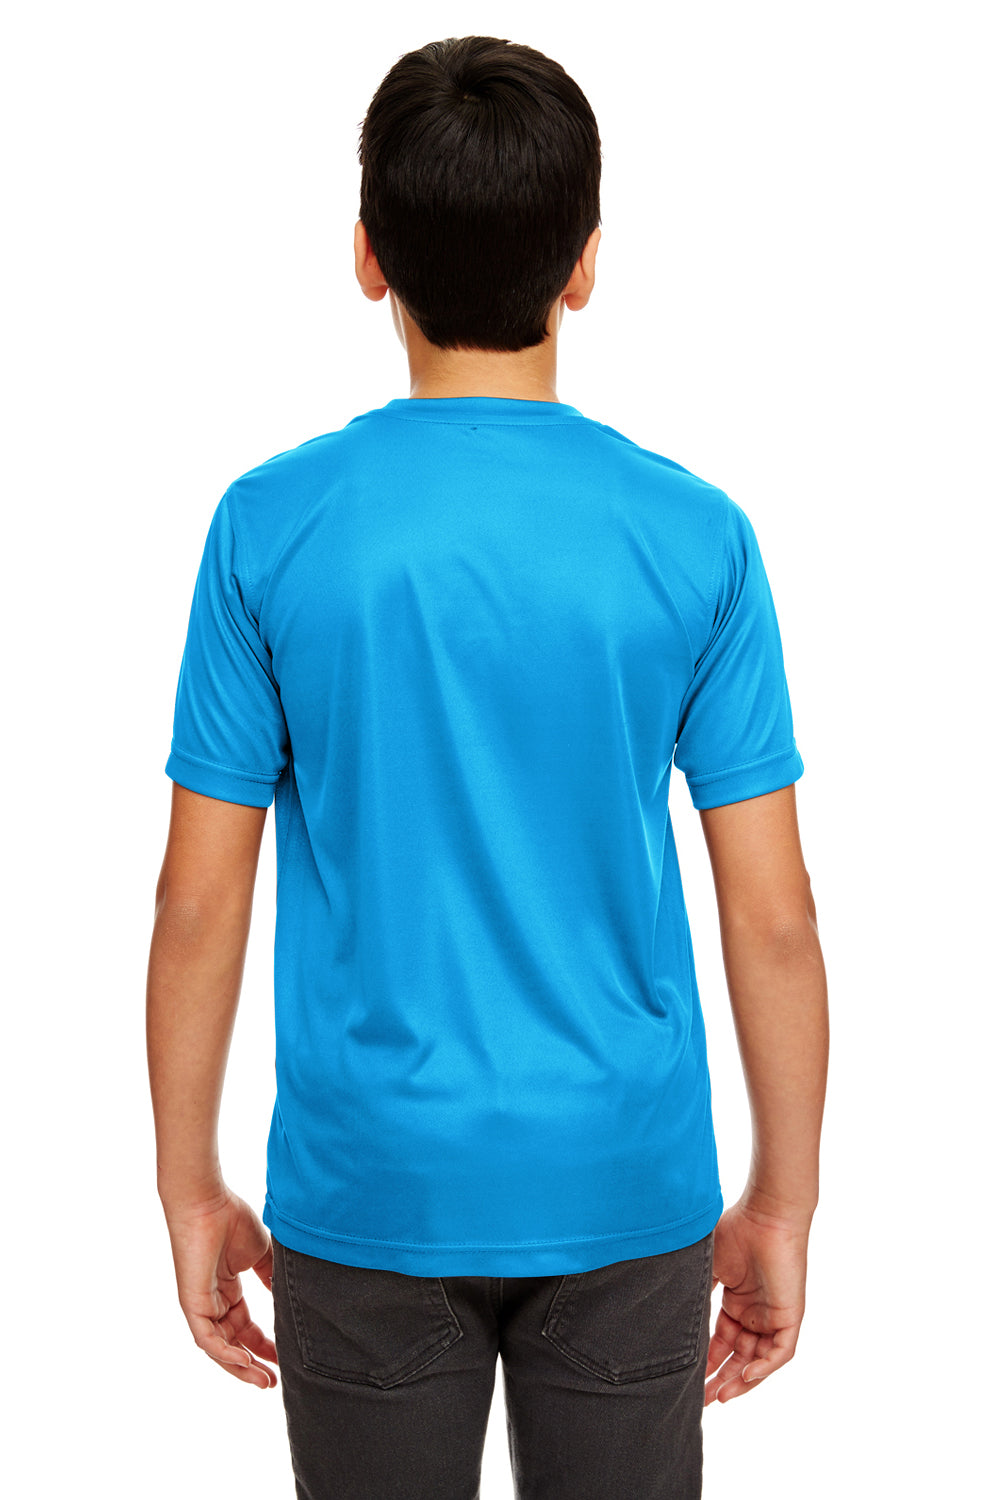 UltraClub 8420Y Youth Cool & Dry Performance Moisture Wicking Short Sleeve Crewneck T-Shirt Sapphire Blue Back